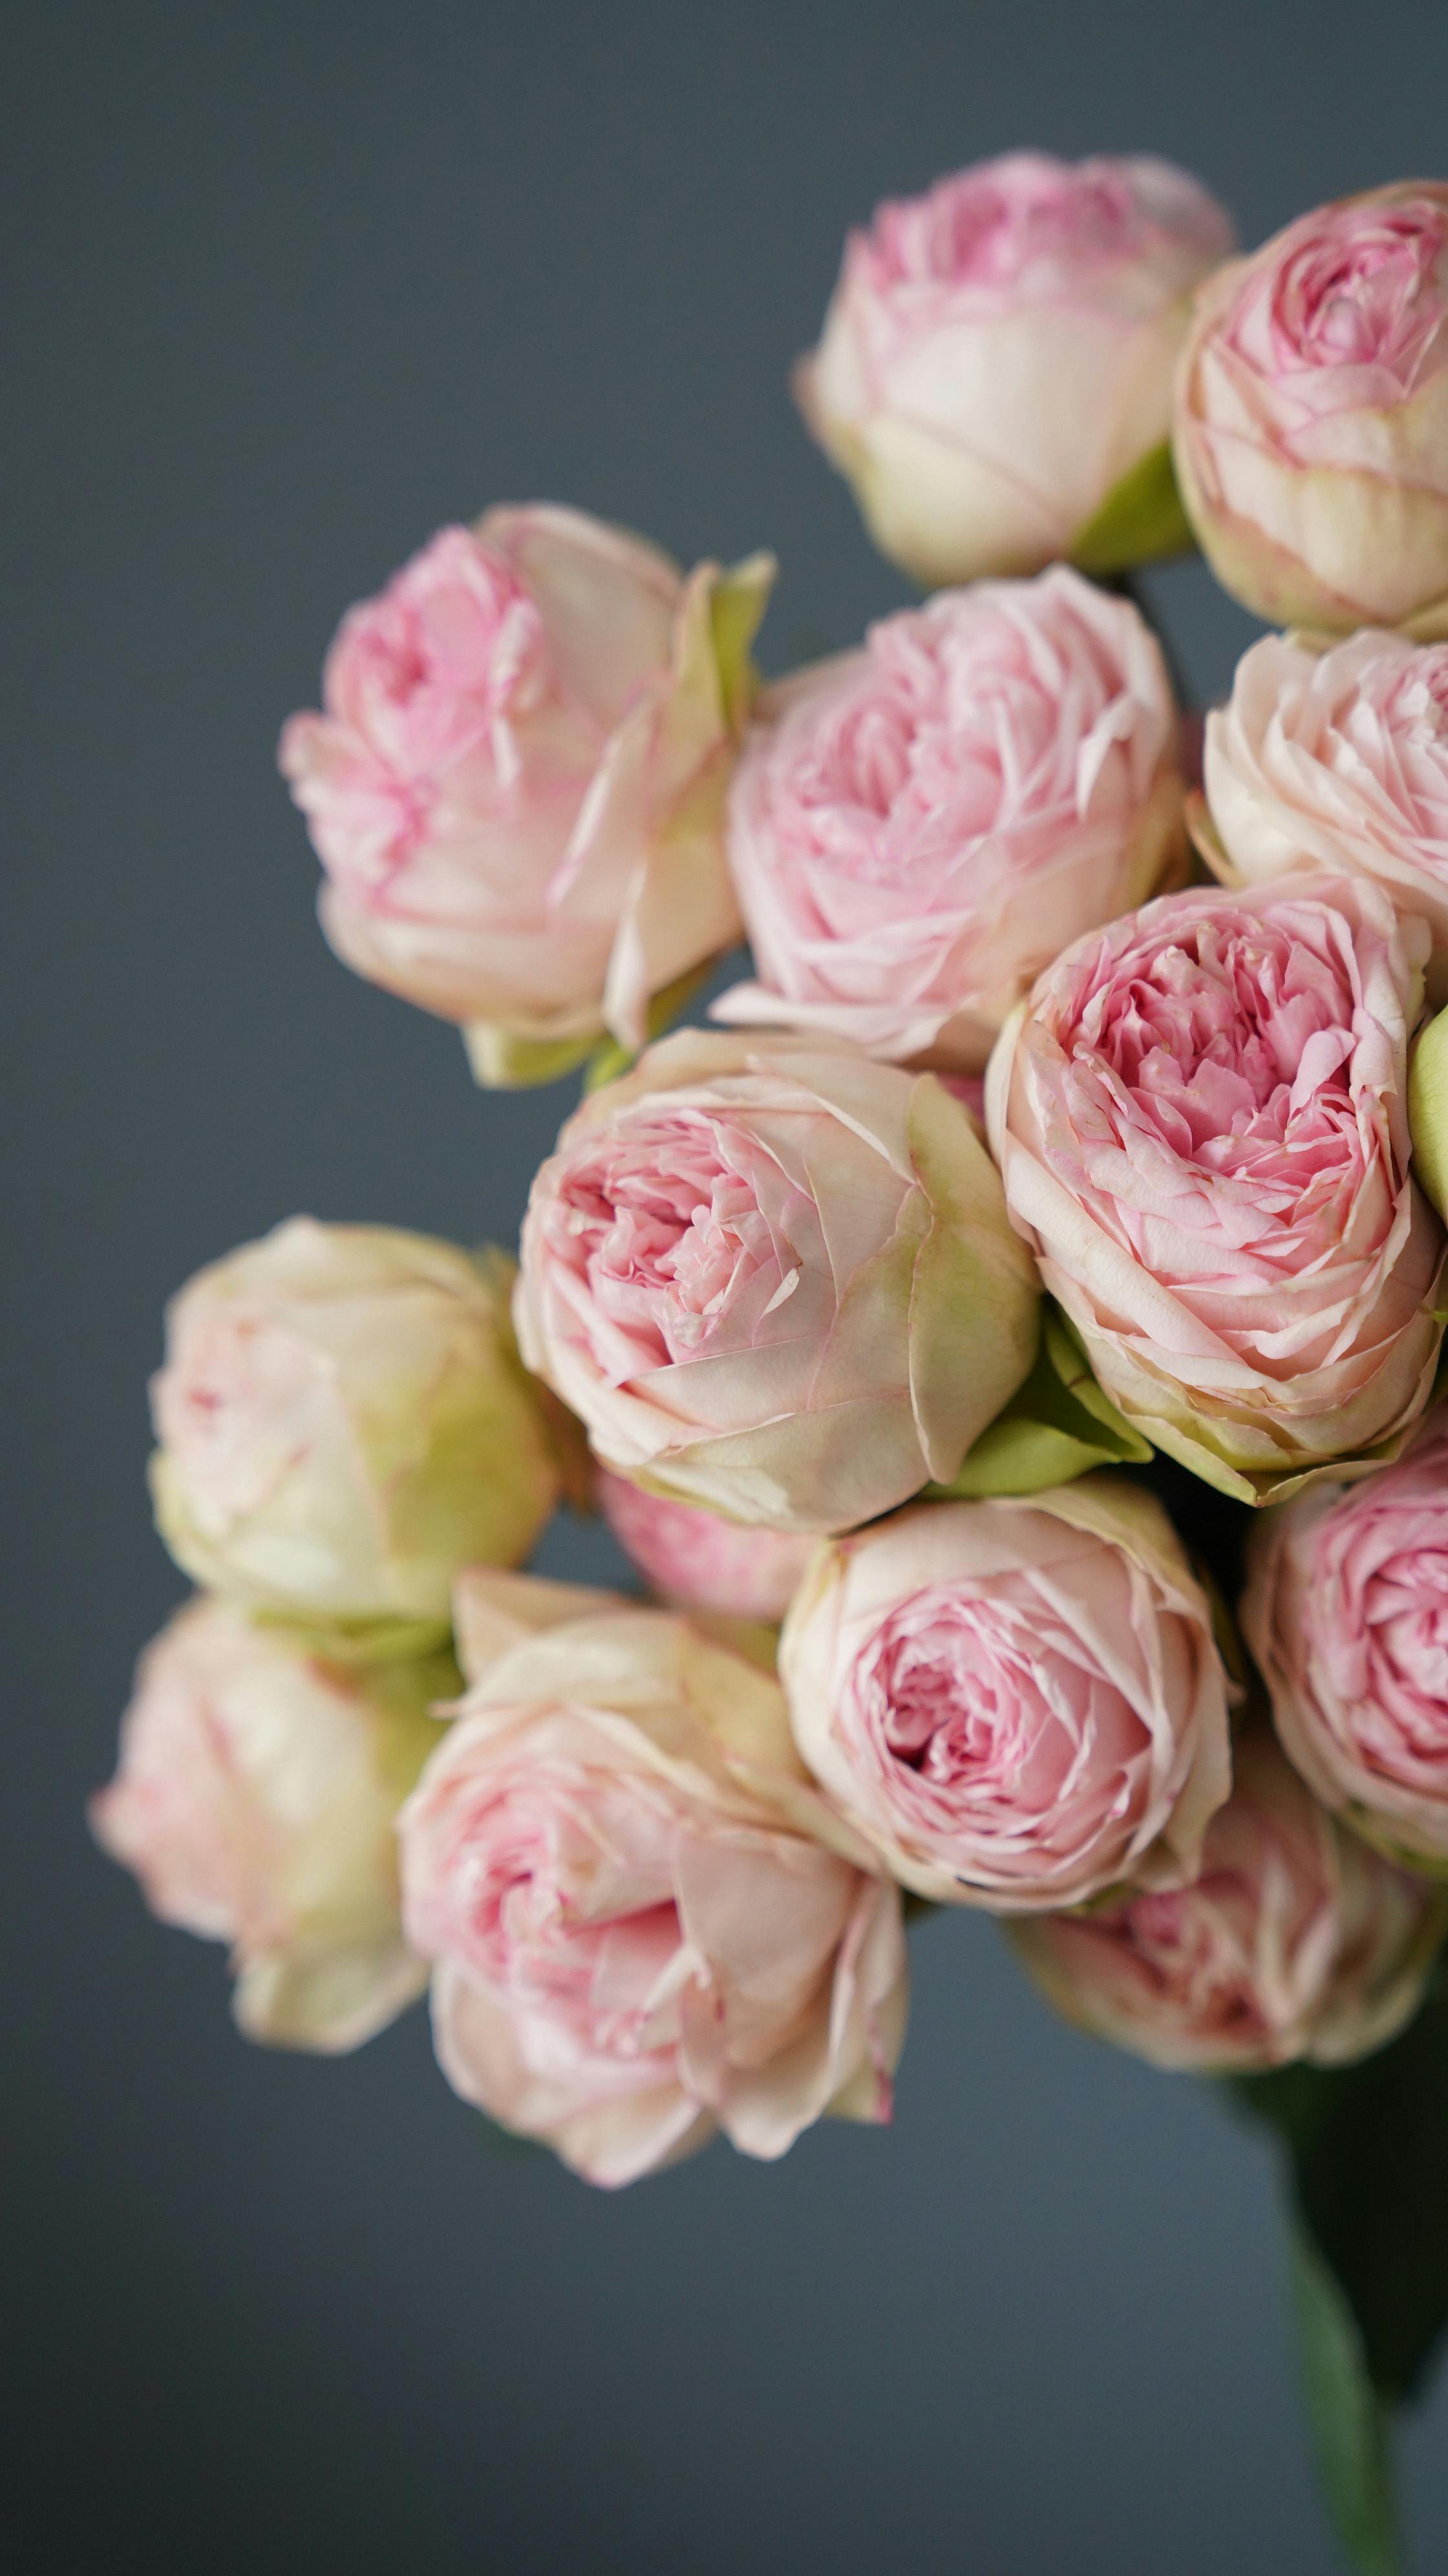 fragrant blossoming rose bouquet with tender buds